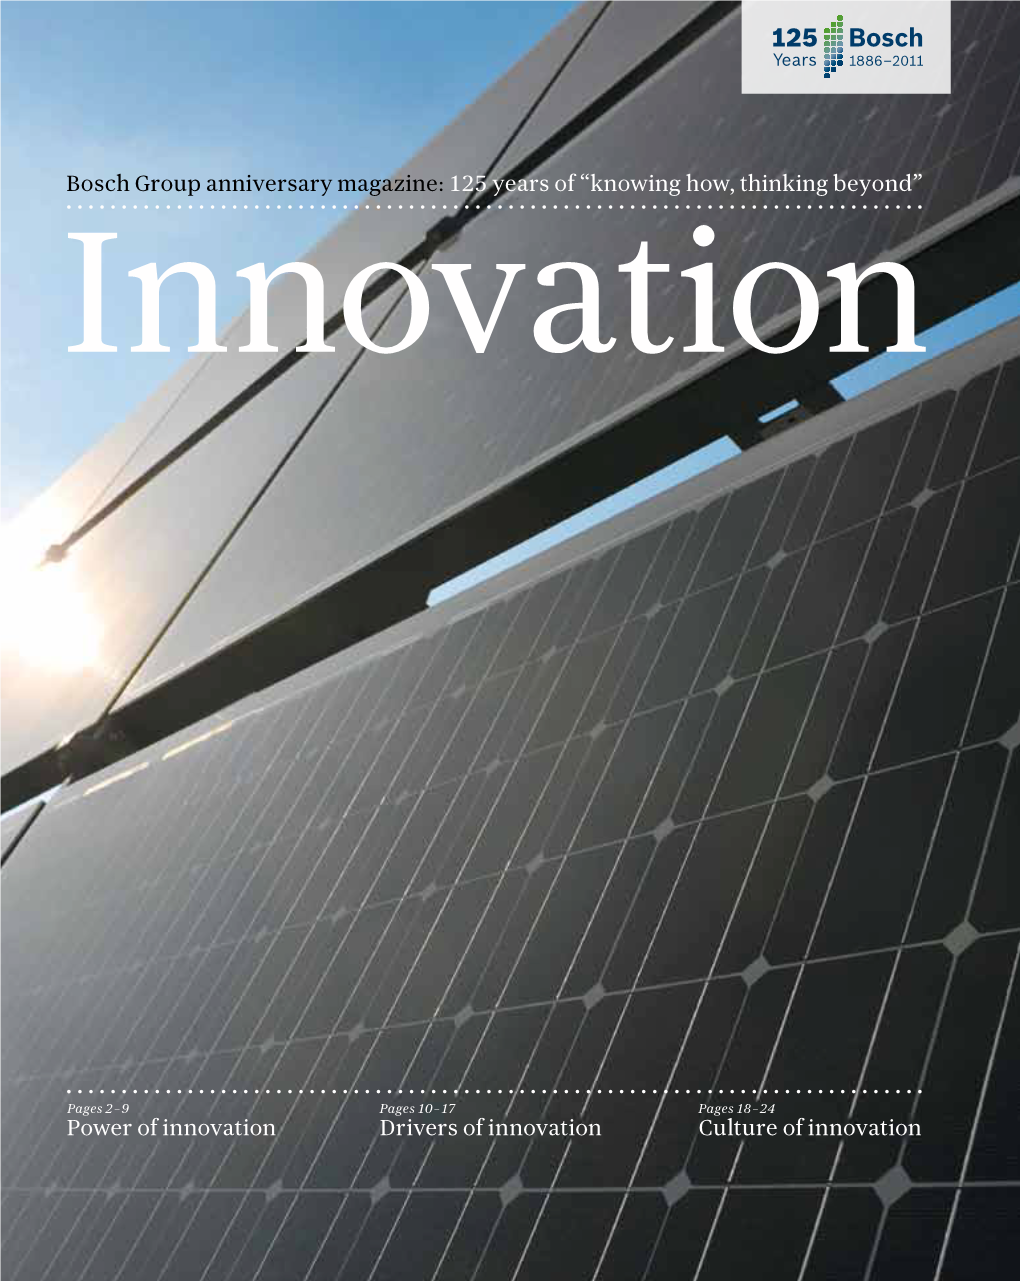 Bosch Group Anniversary Magazine: 125 Years of “Knowing How, Thinking Beyond” Innovation